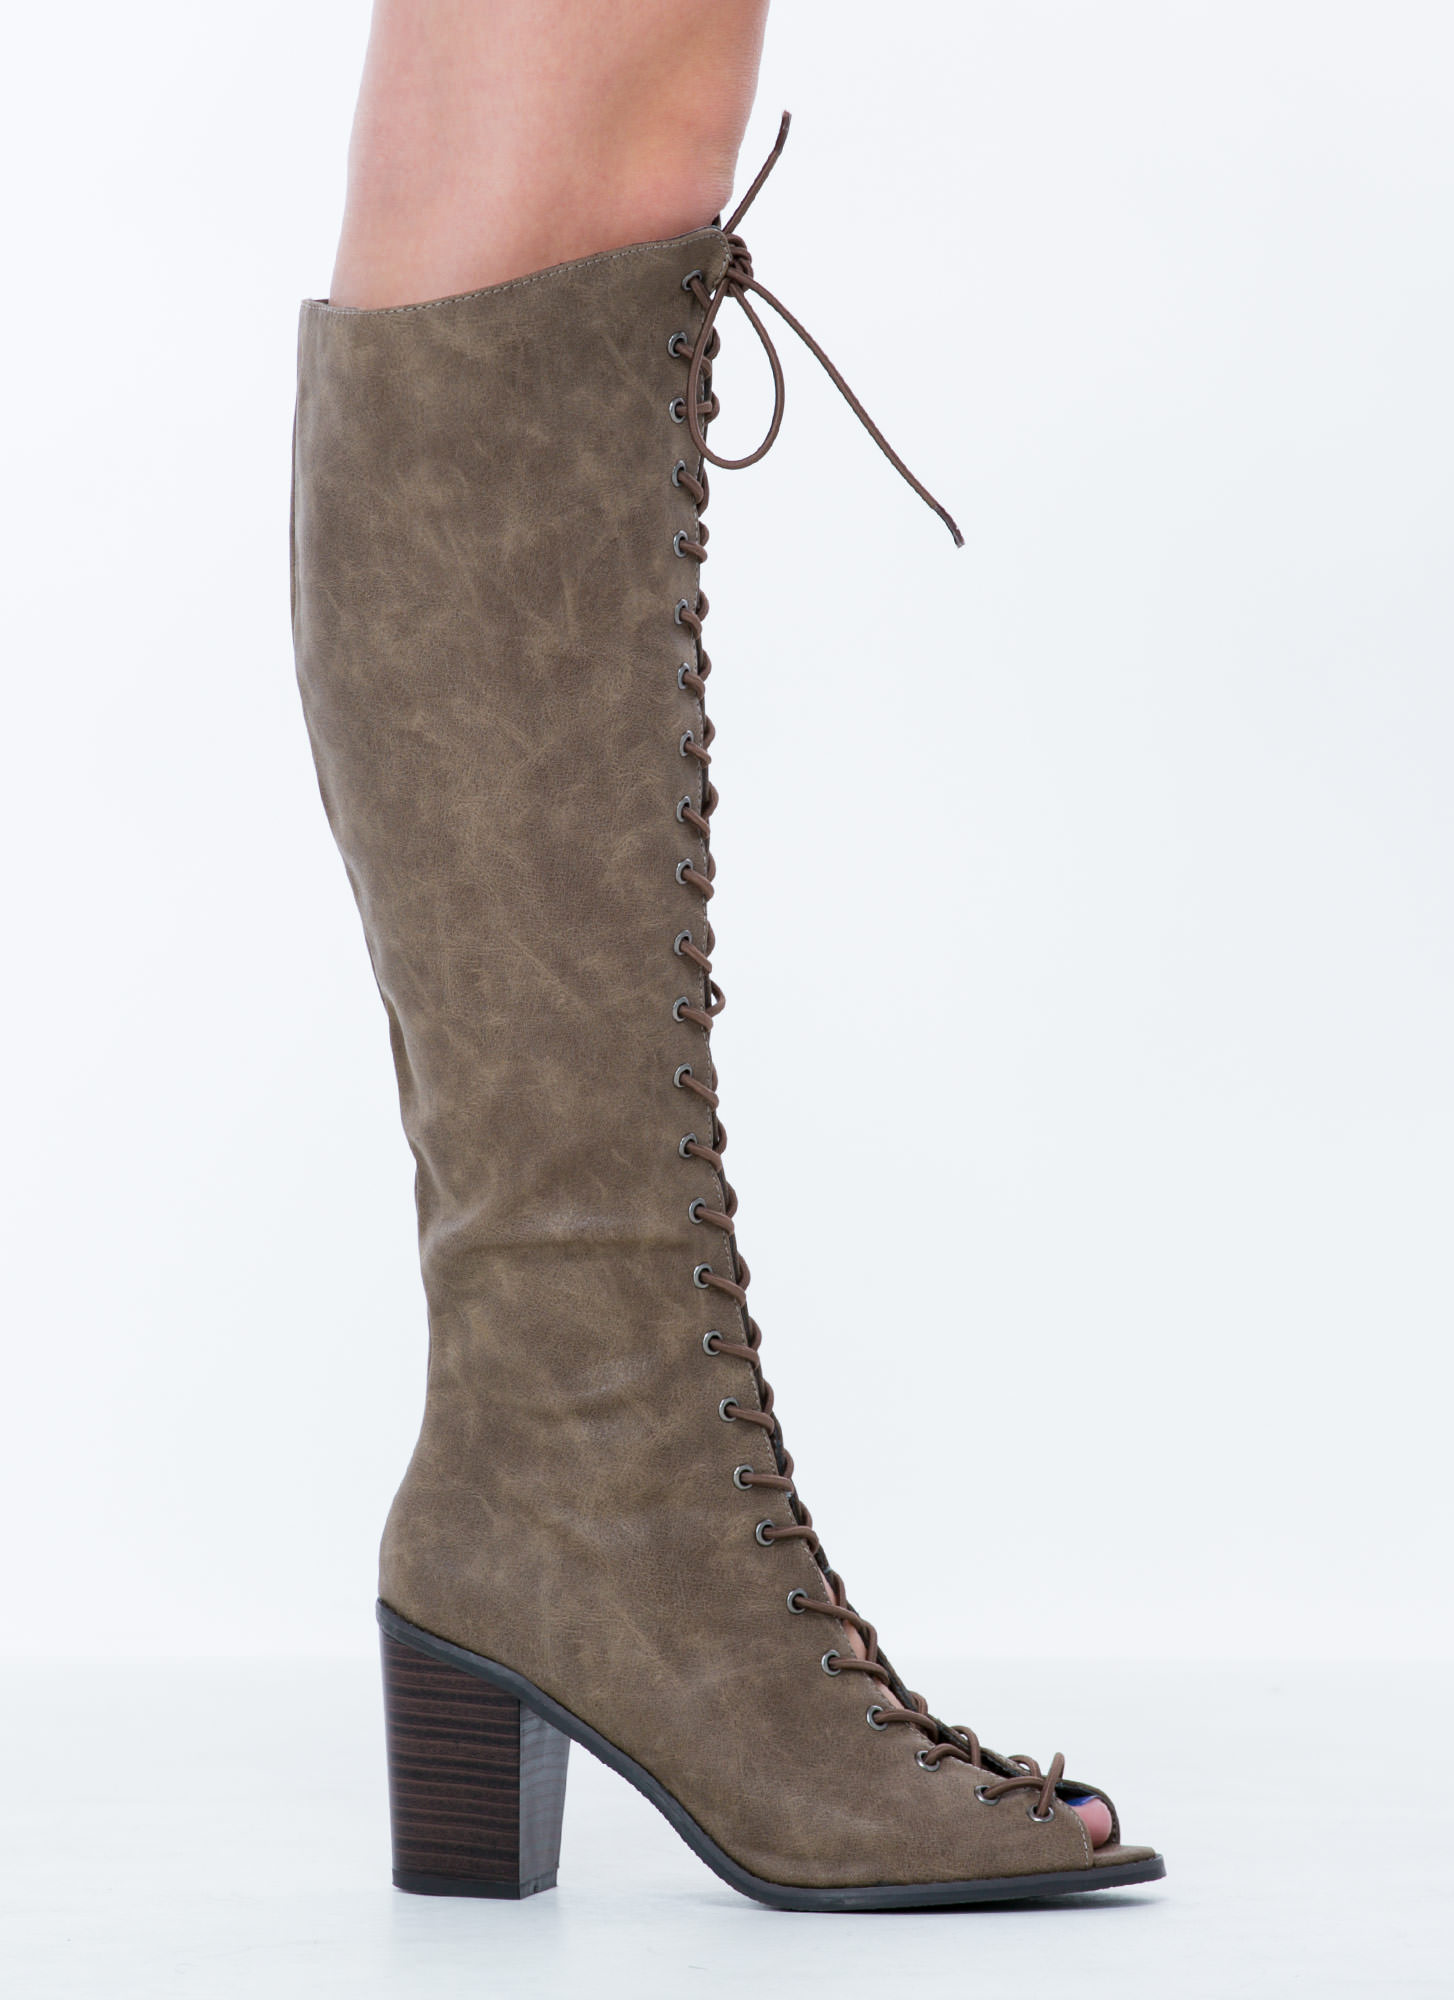 Statement Day Beige Lace-Up Boots